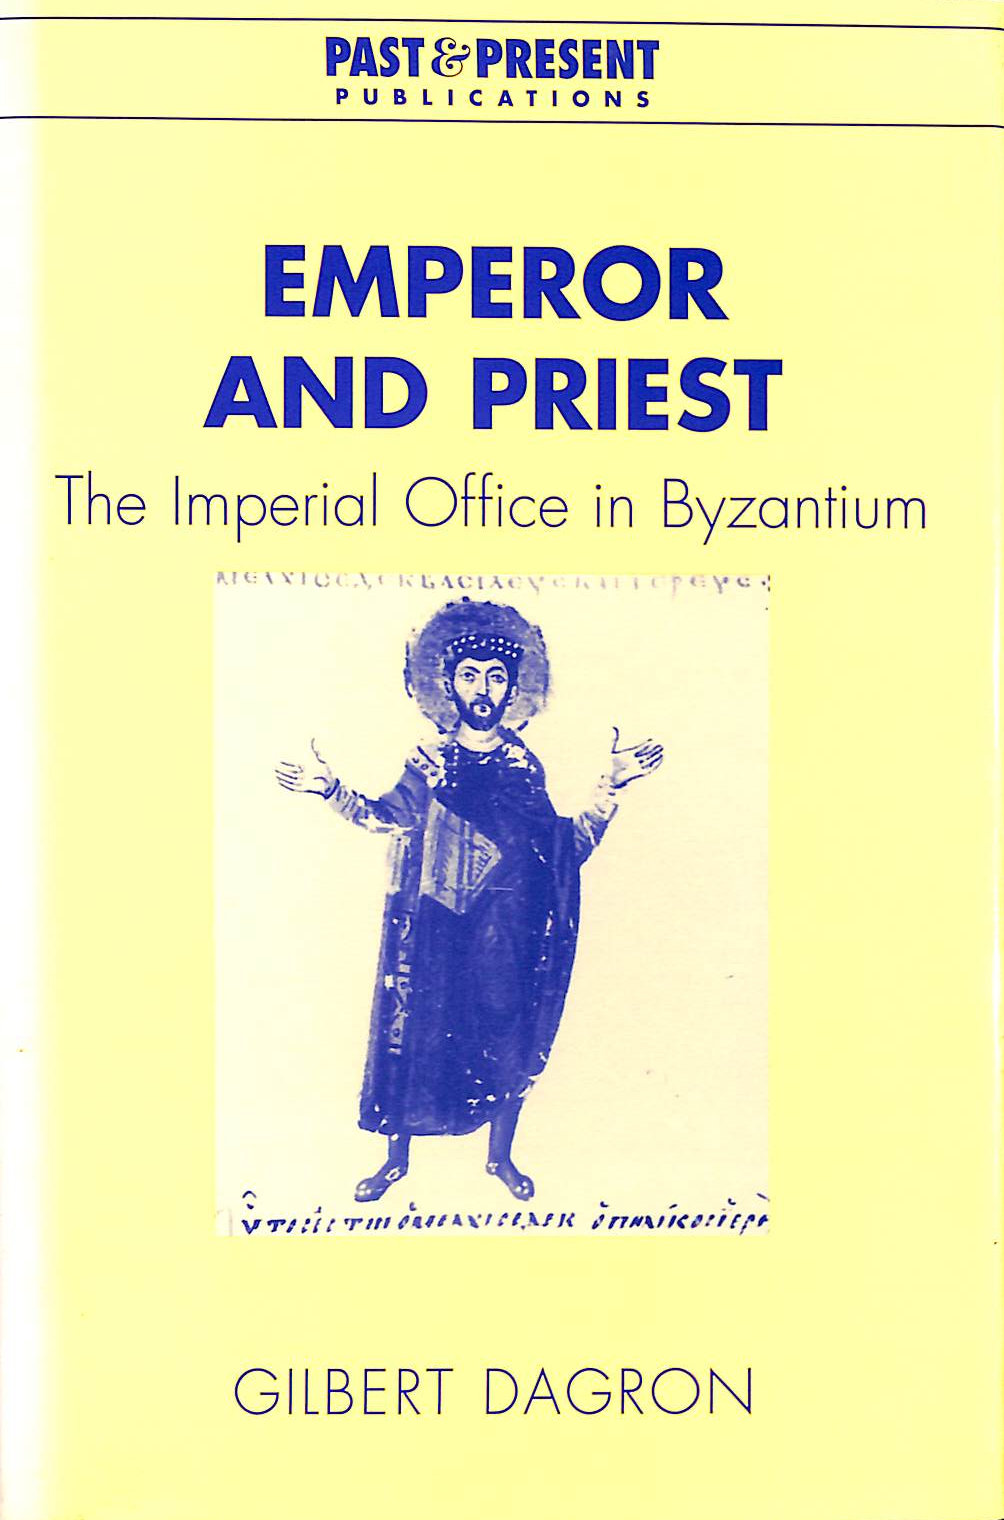 DAGRON, GILBERT; BIRRELL, JEAN [TRANSLATOR] - Emperor and Priest: The Imperial Office in Byzantium (Past and Present Publications)